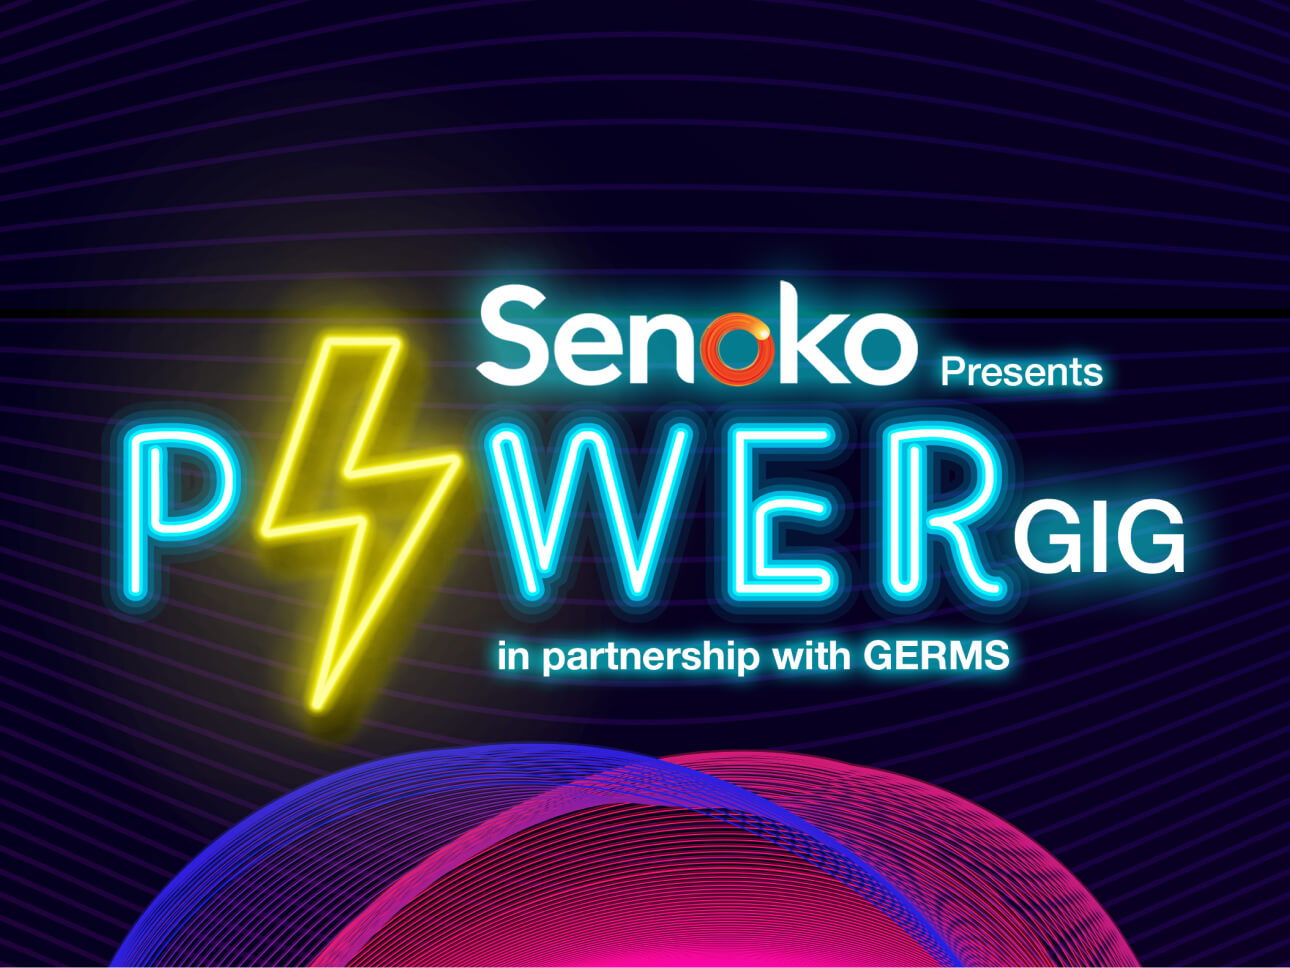 Senoko Energy presents Power Gig - a weekend long online music festival by local artistes to raise funds for Community Chest’s The Invictus Fund